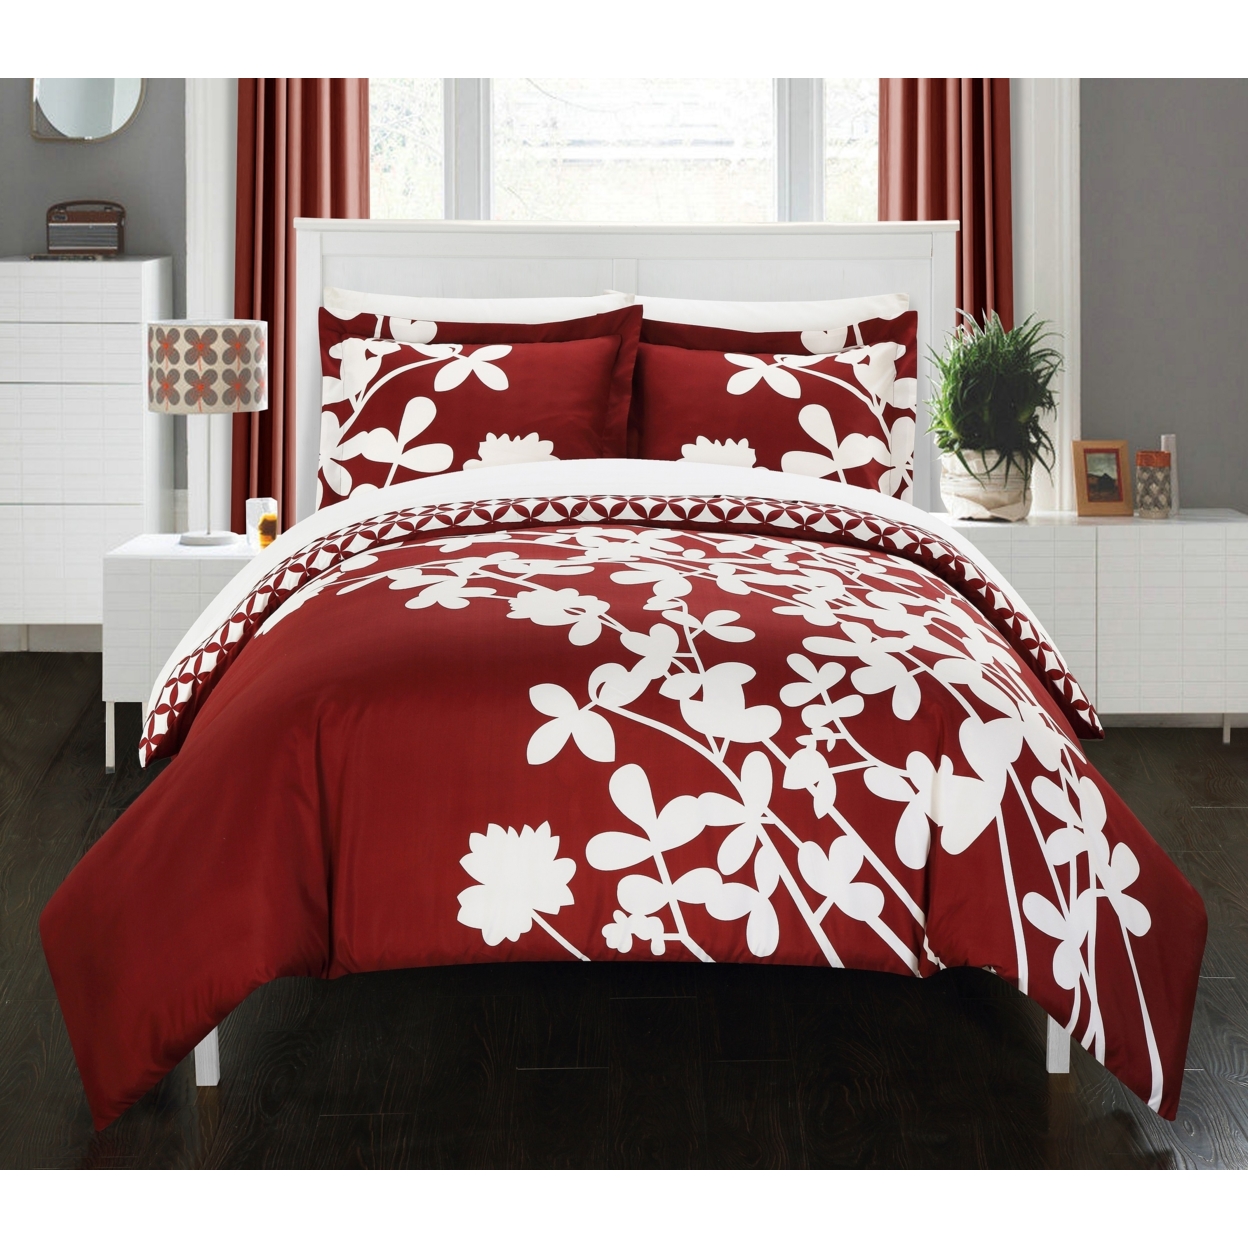 3 Piece Amaryllis Reversible Large Scale Floral Design Printed With Diamond Pattern Reverse Duvet Cover Set - Black, Queen